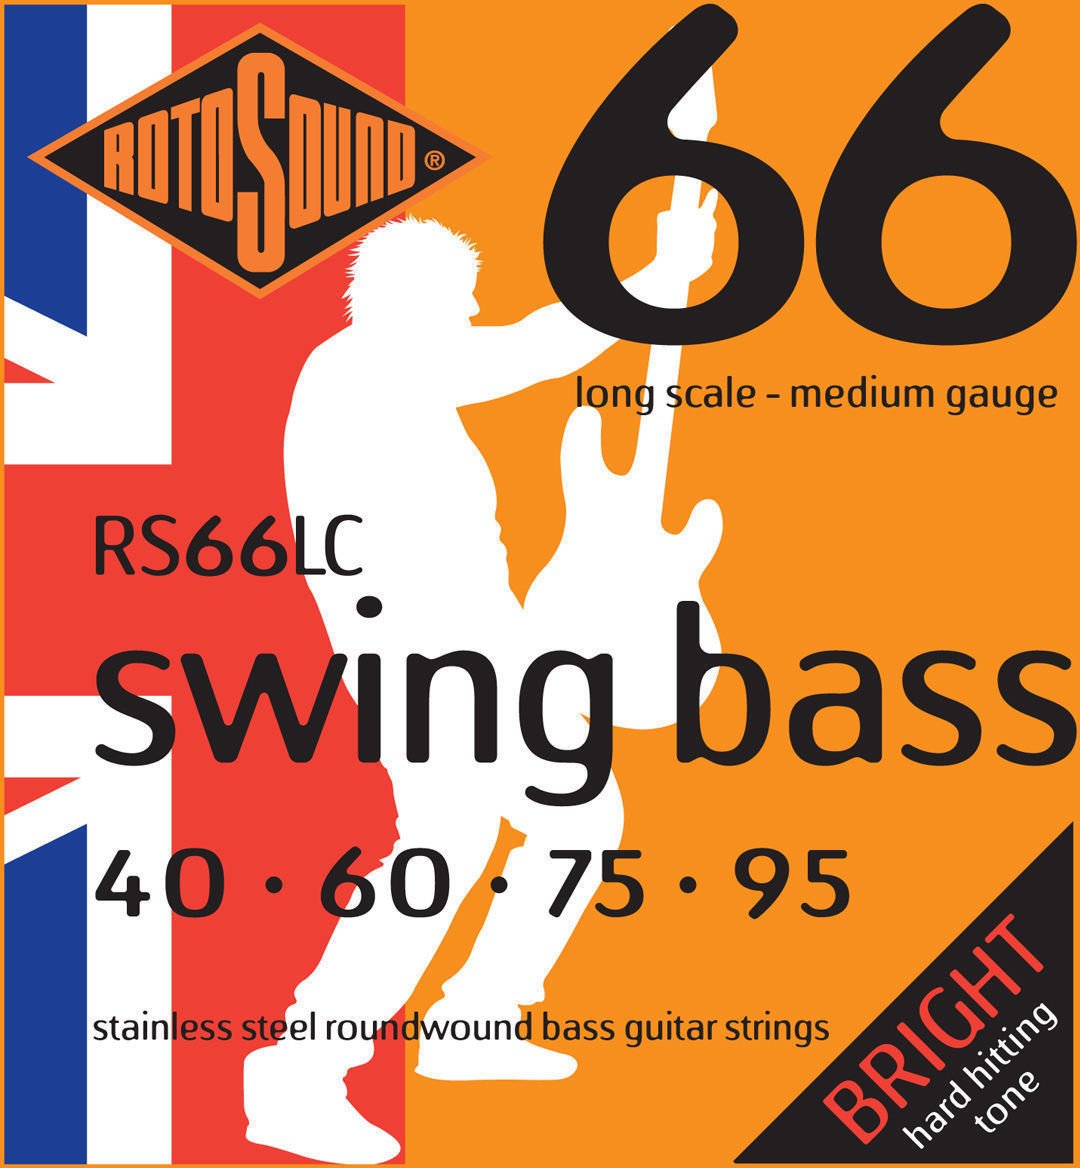 Bassguitar strings Rotosound RS66LC